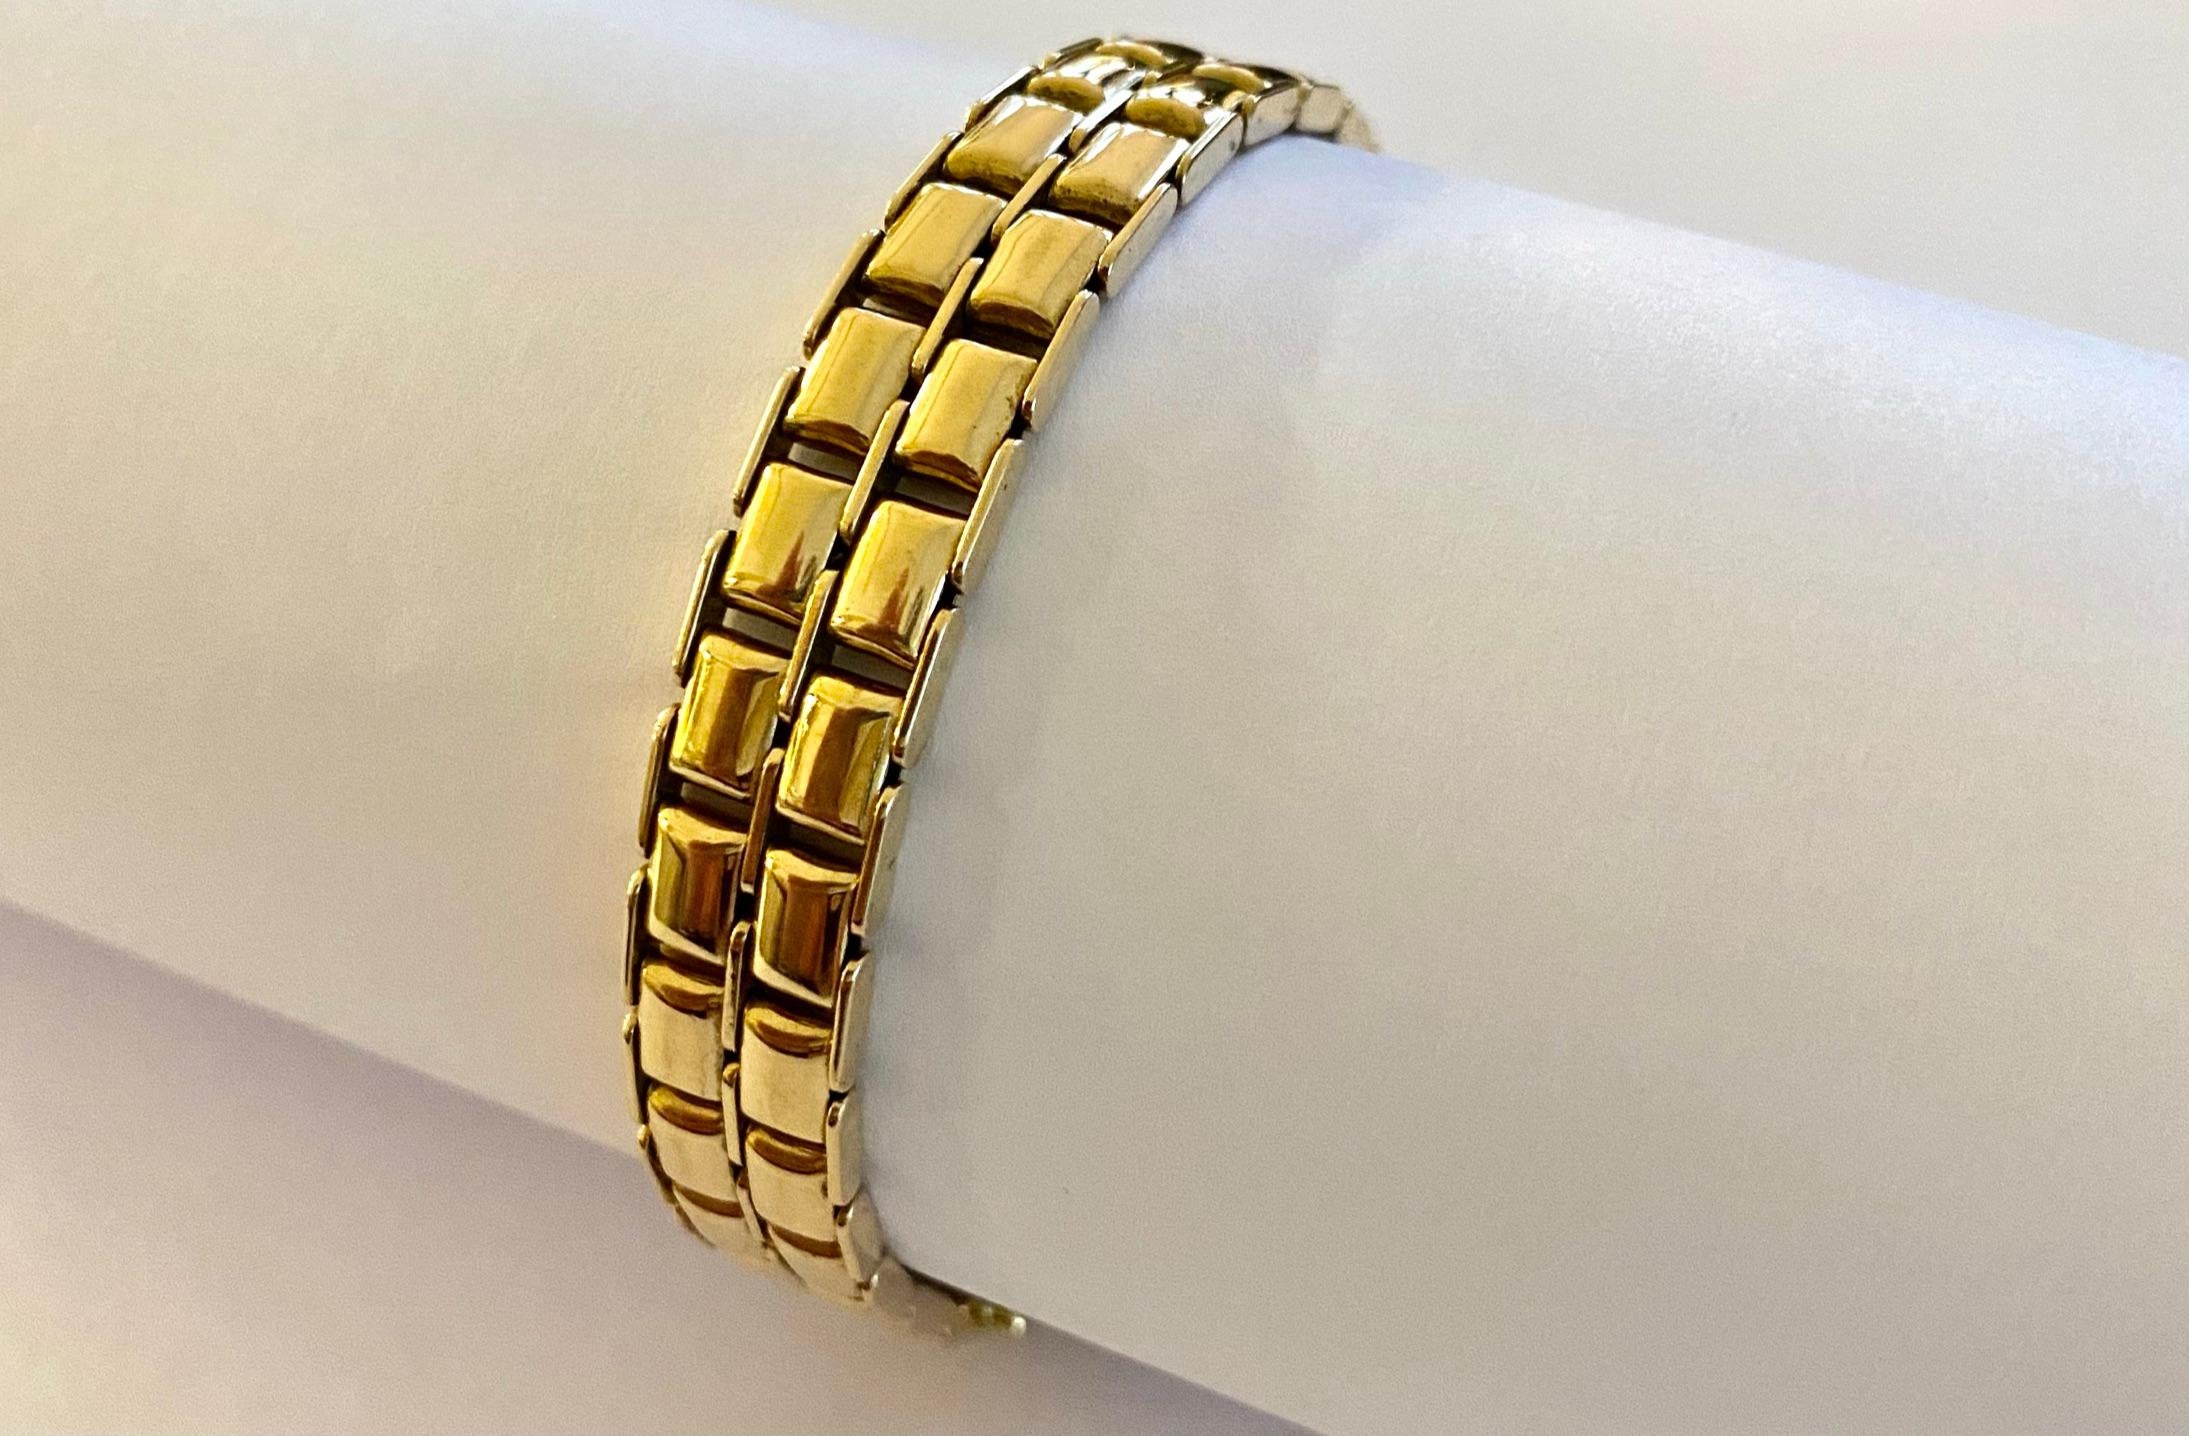 A 14K. yellow gold bracelet, consisting of two rows of links with a box clasp and a safety figure eight.
Signed: * 1 Ar = Uno-A-Erre - Italia s.p.a. 52100 Arezzo- Via Fiorentina 550. (famous gold jewelry factory in Italy)
Length of the bracelet: